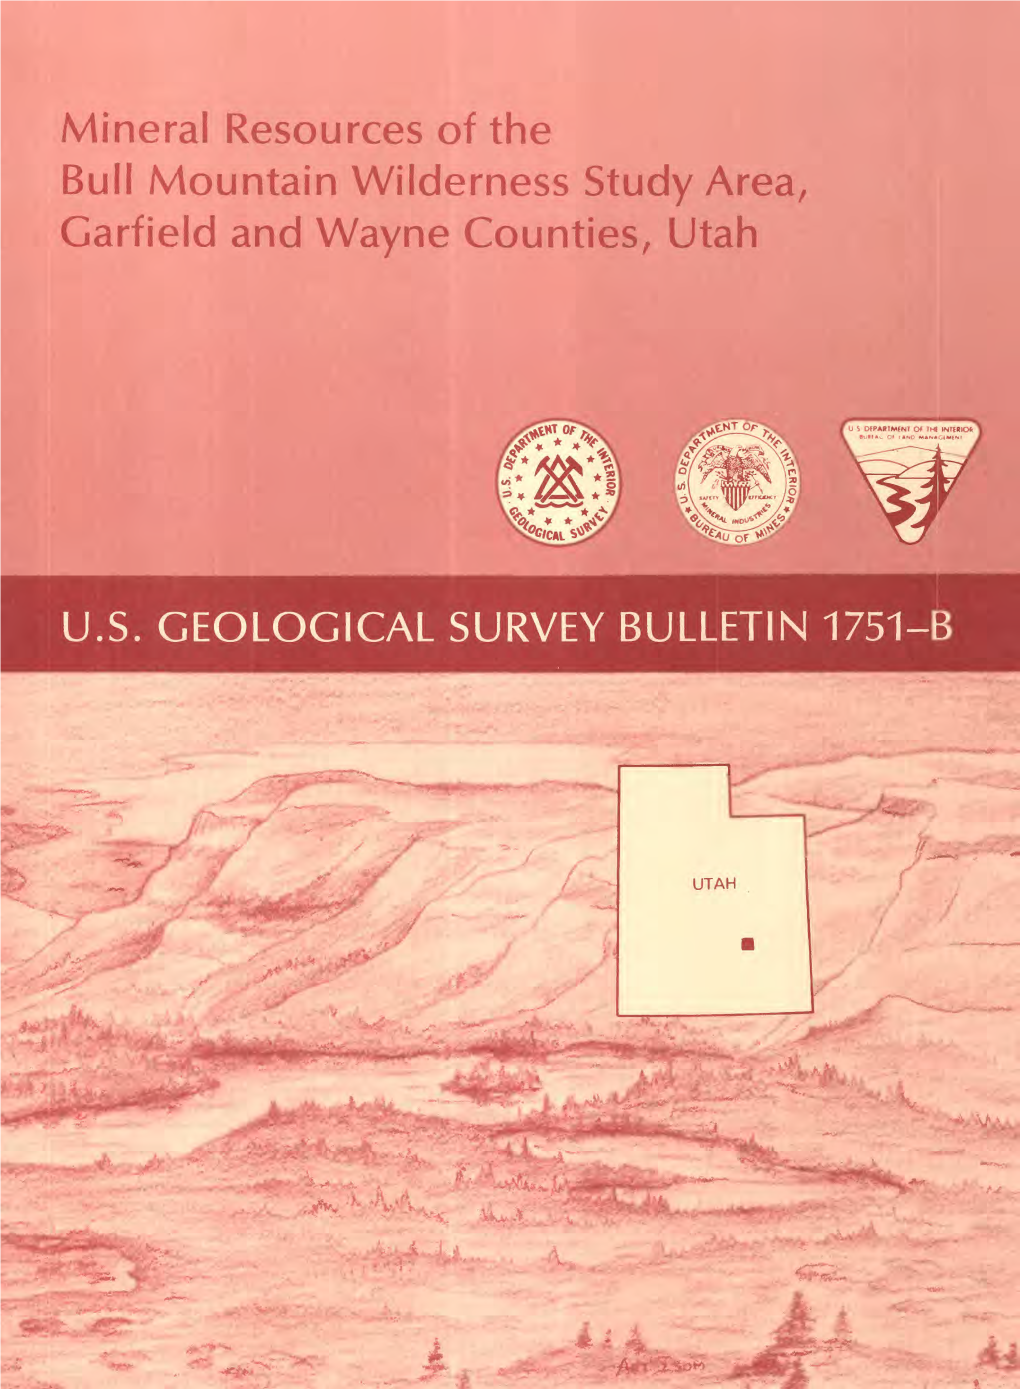 Mineral Resources of the Bull Mountain Wilderness Study Area, Garfield and Wayne Counties, Utah